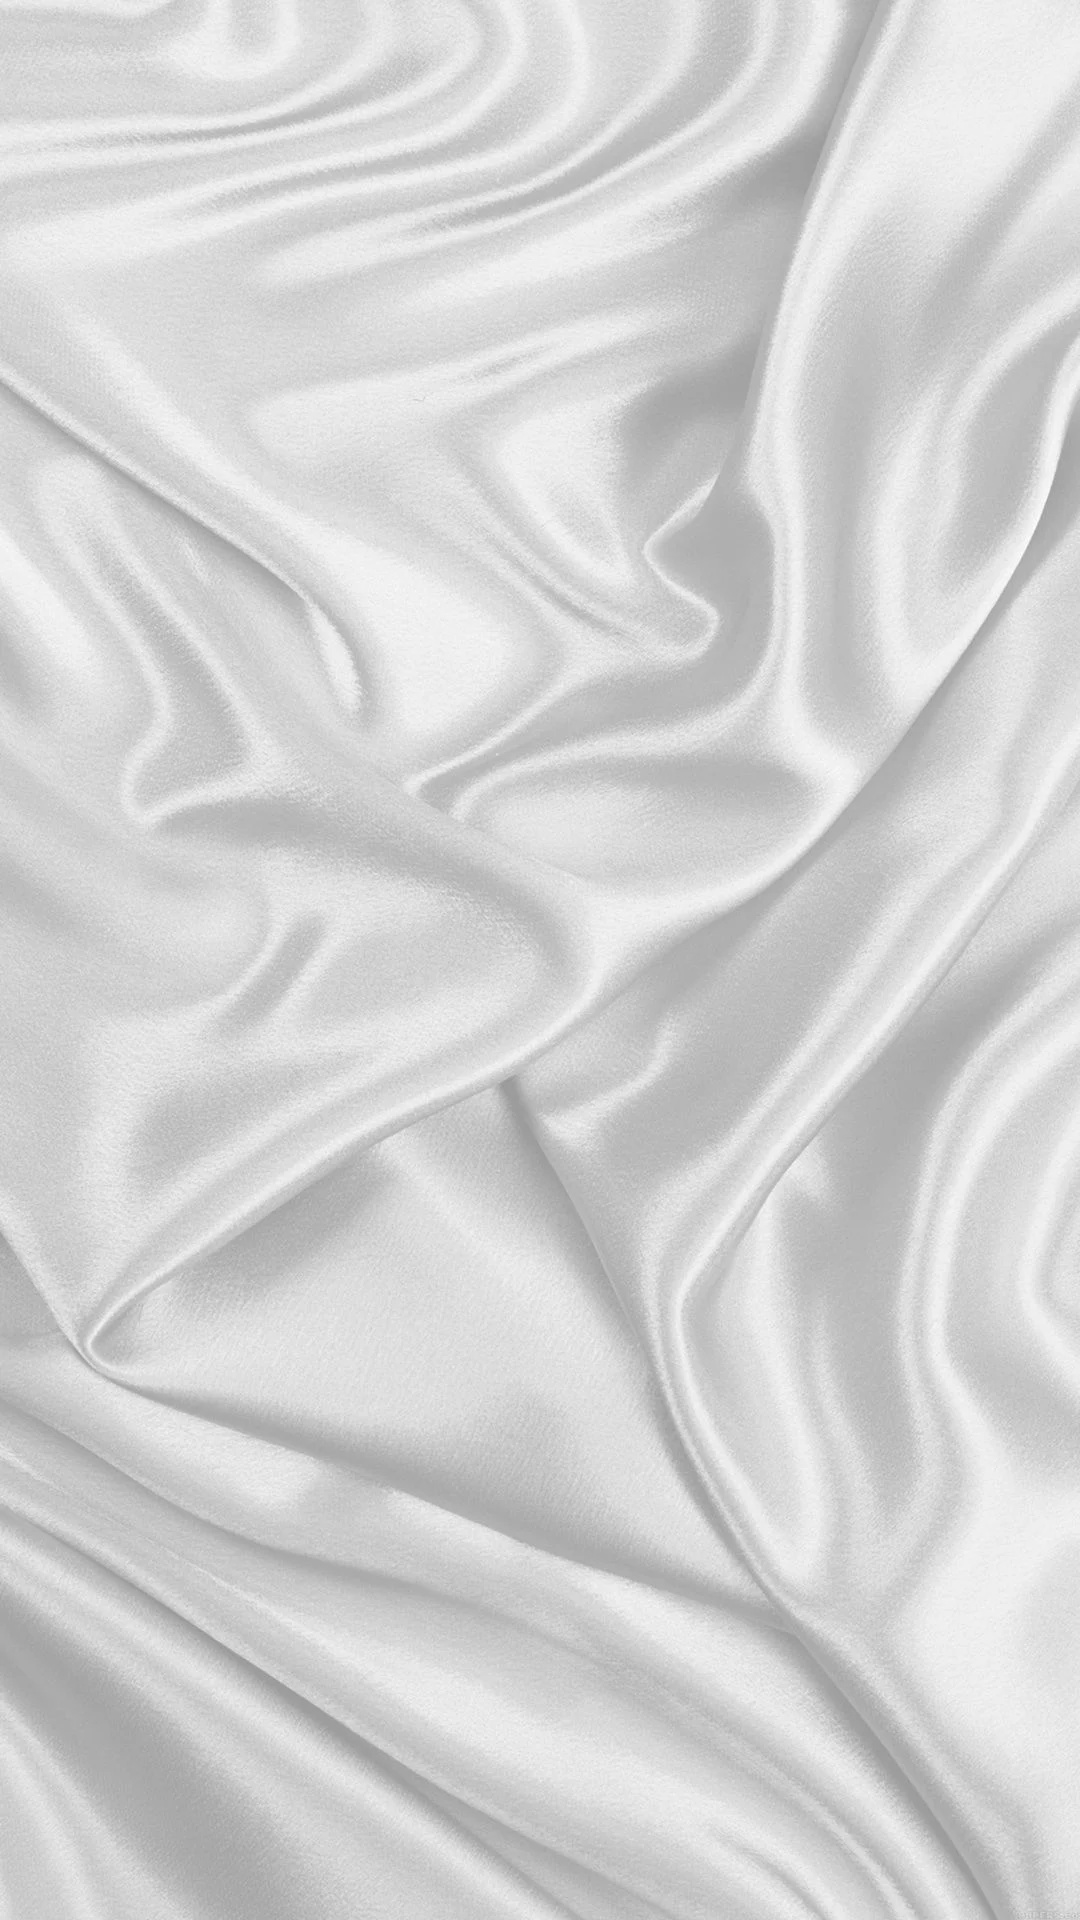 White satin wallpapers, High-quality pictures, Luxurious, Classic, 1080x1920 Full HD Handy